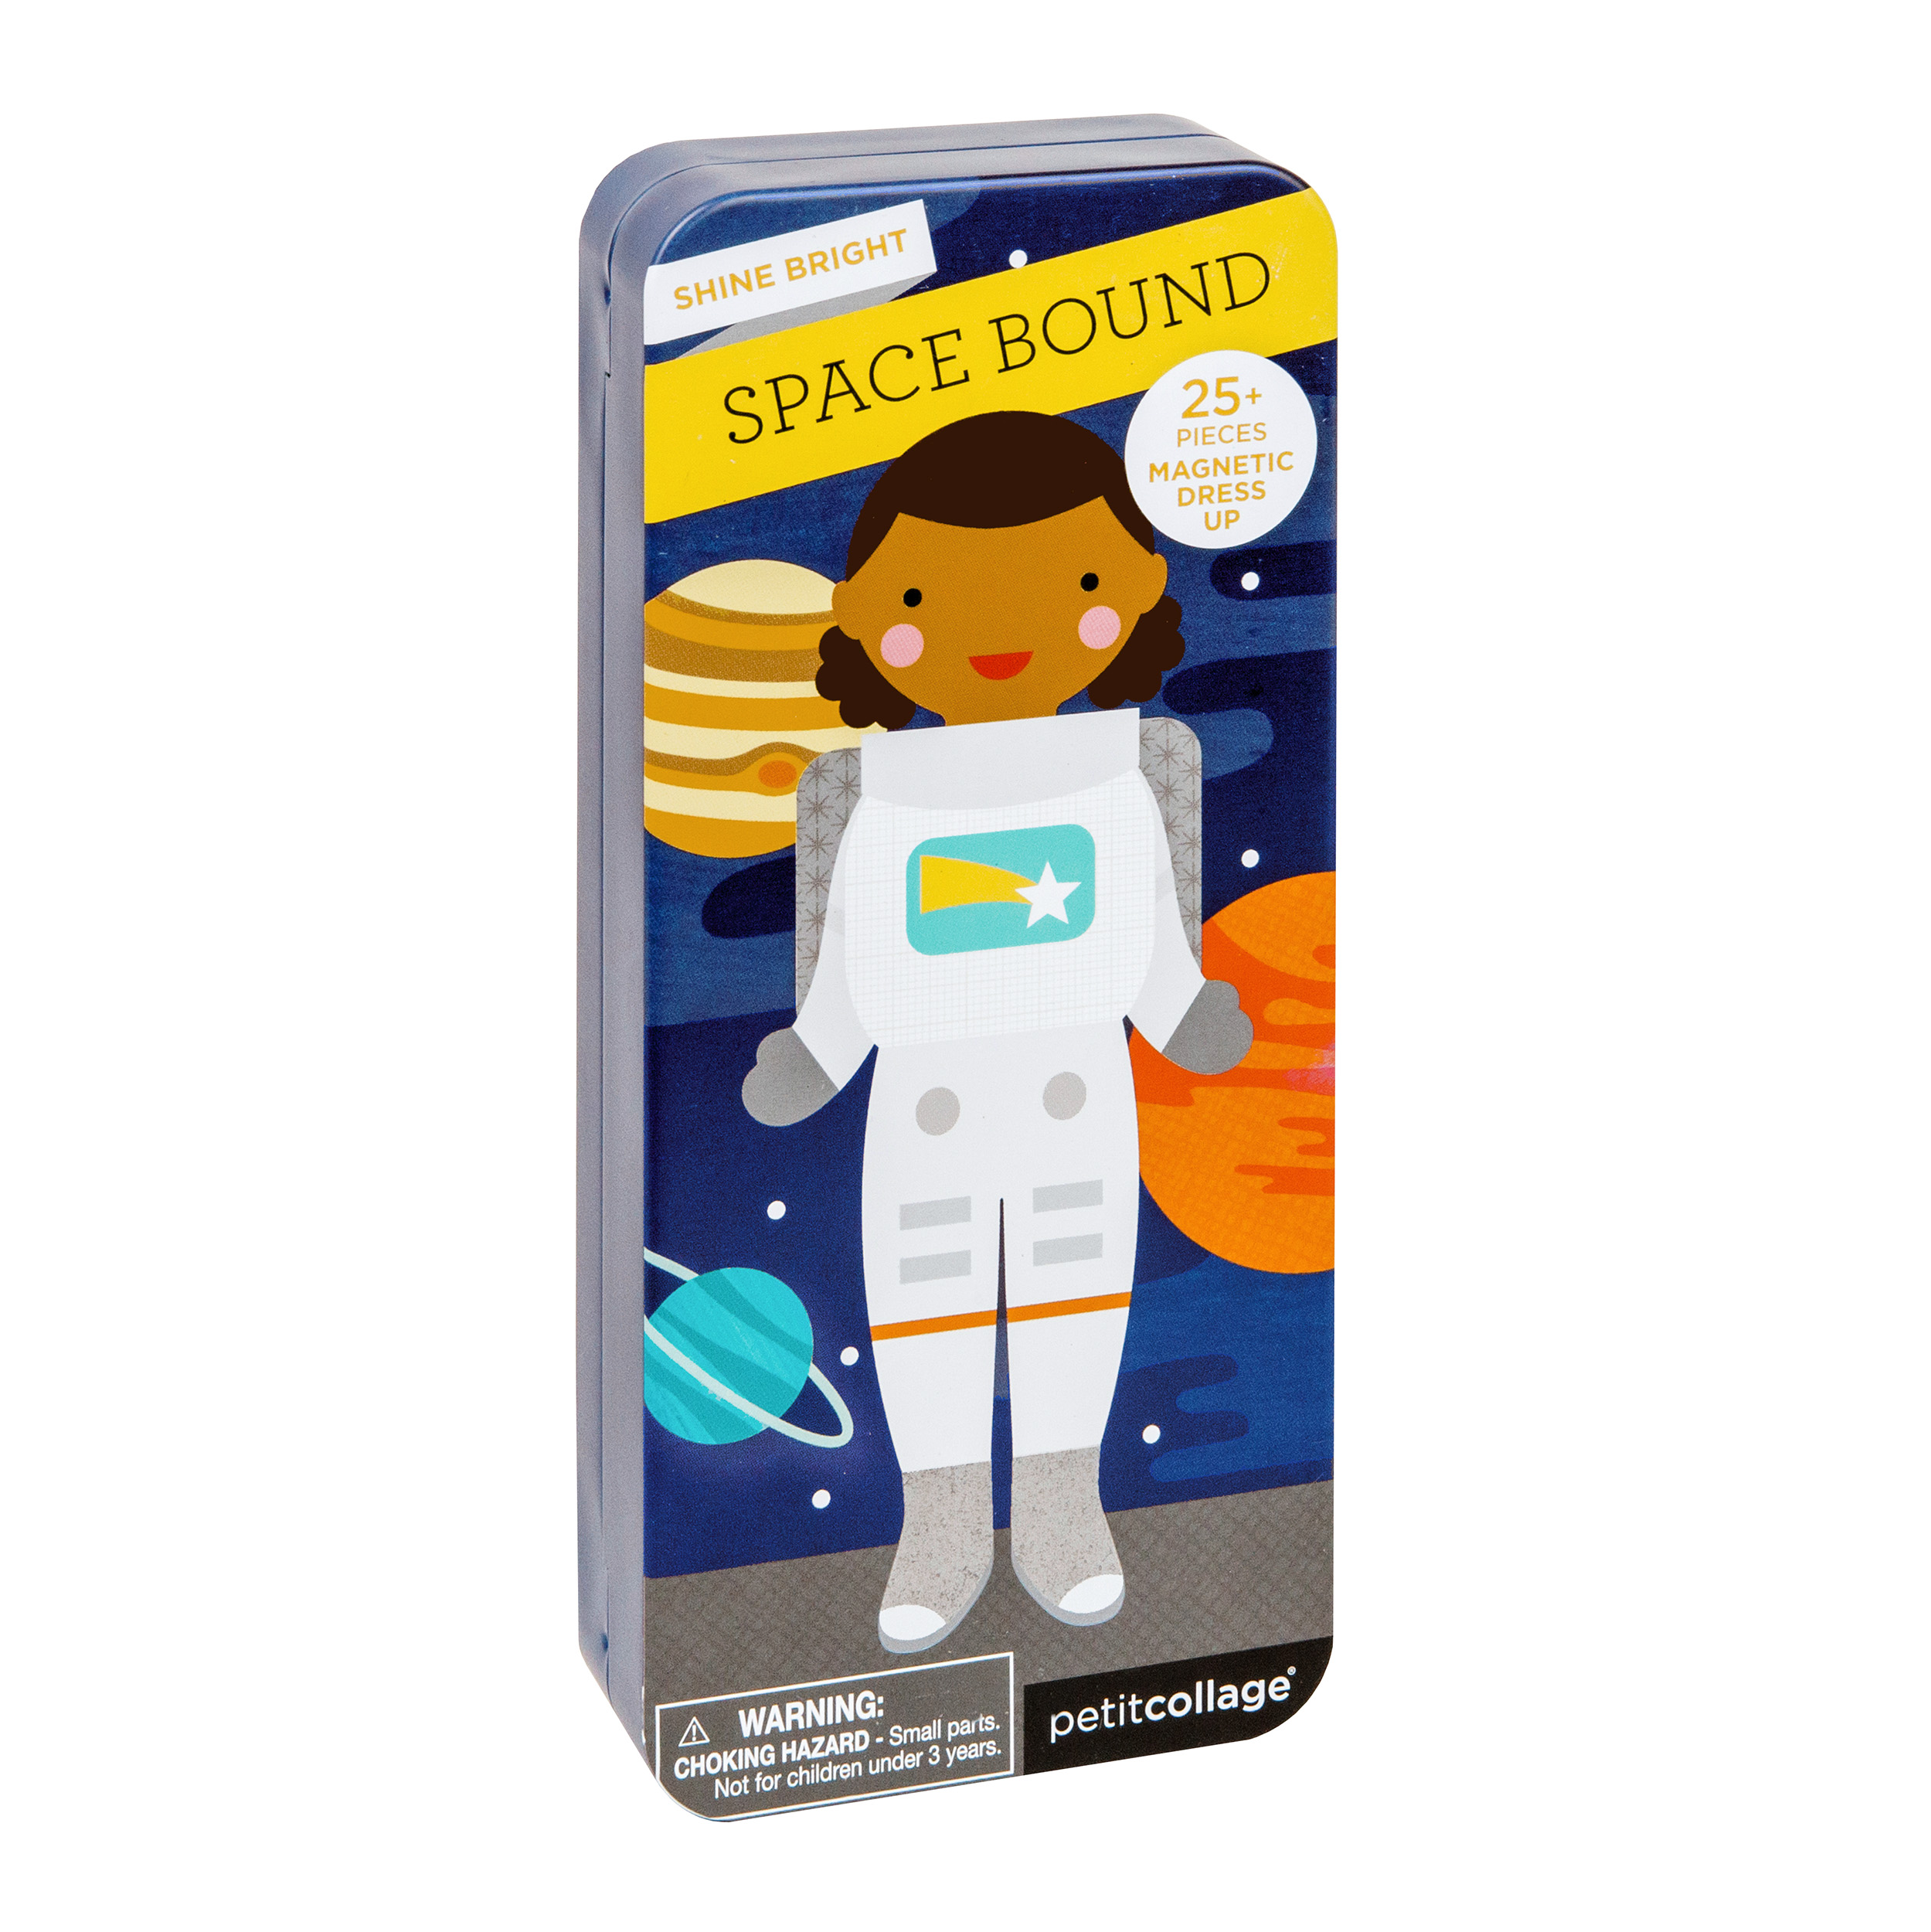 Shine Bright Space Bound : Magnetic Dress Up  